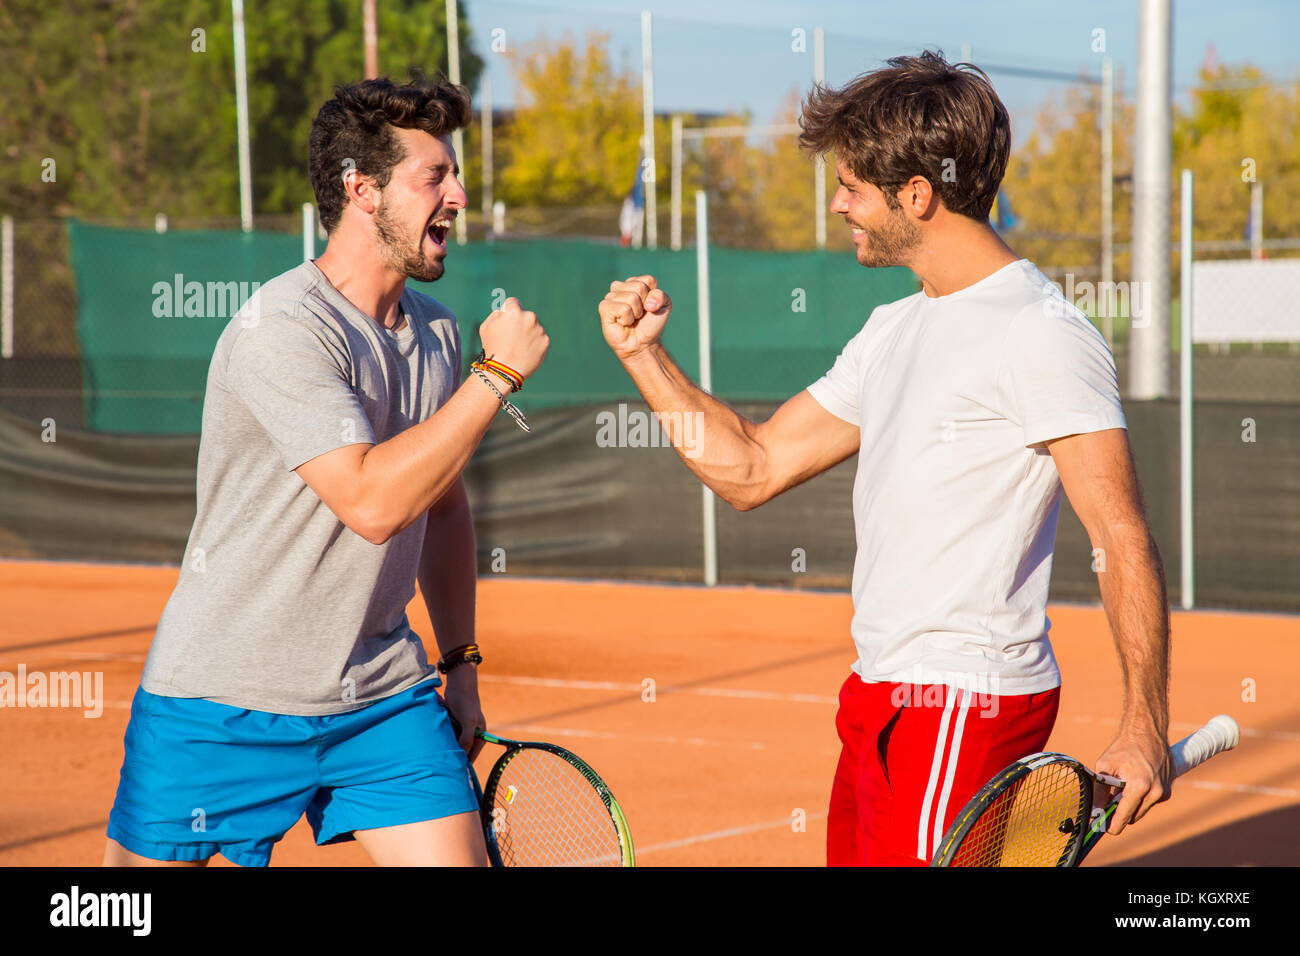 Two friends standing on tennis court and encouraging each other before  match Stock Photo - Alamy